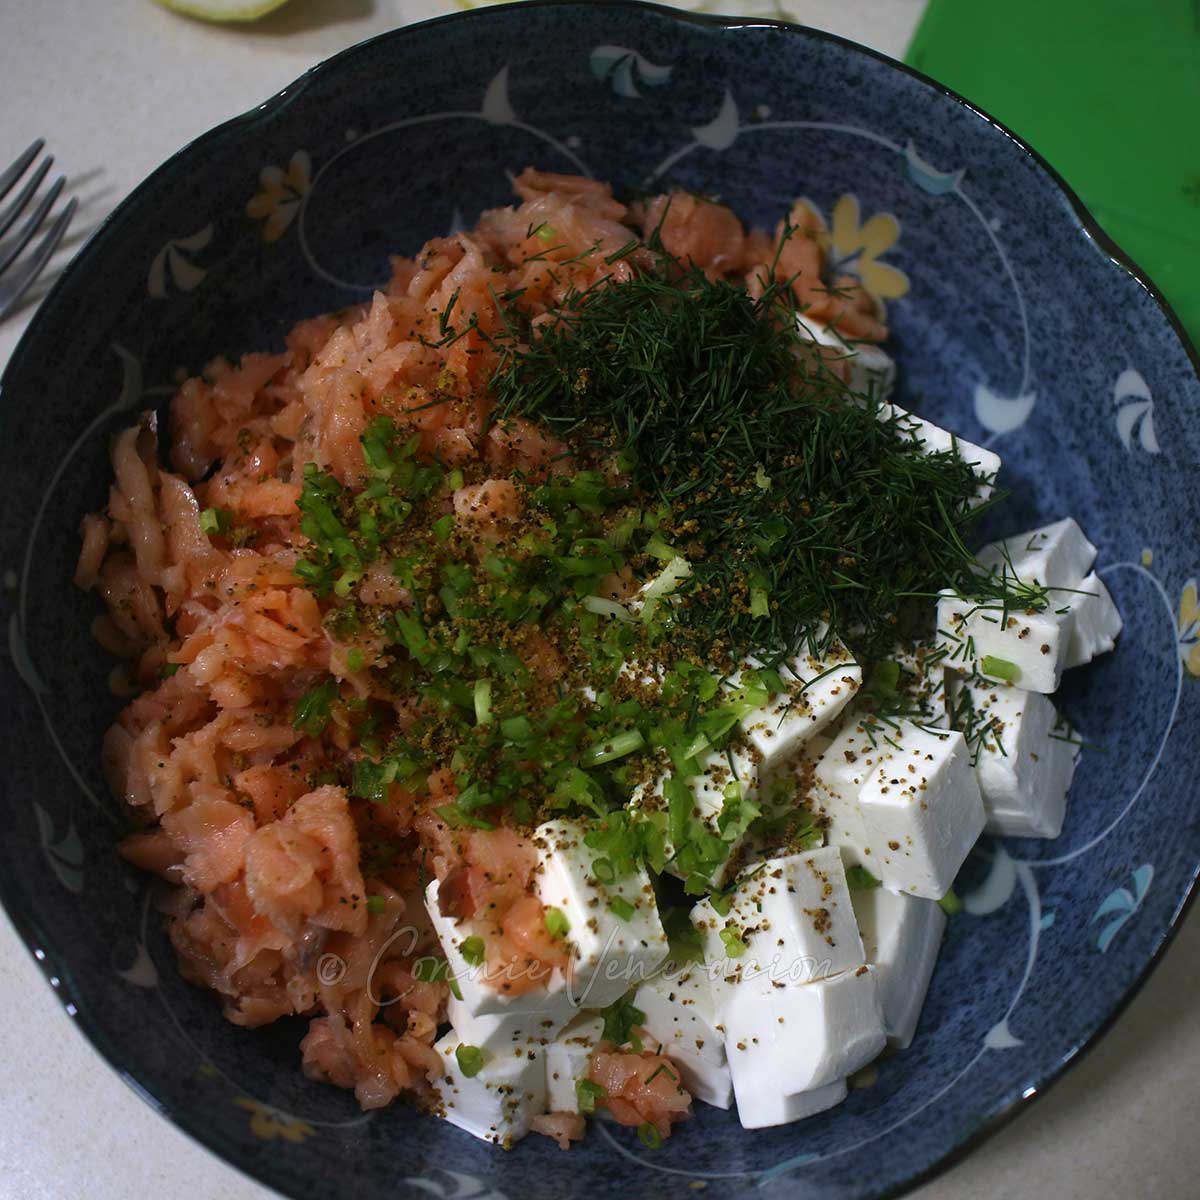 Chopped smoked salmon, cream cheese, dill and scallions in bowl